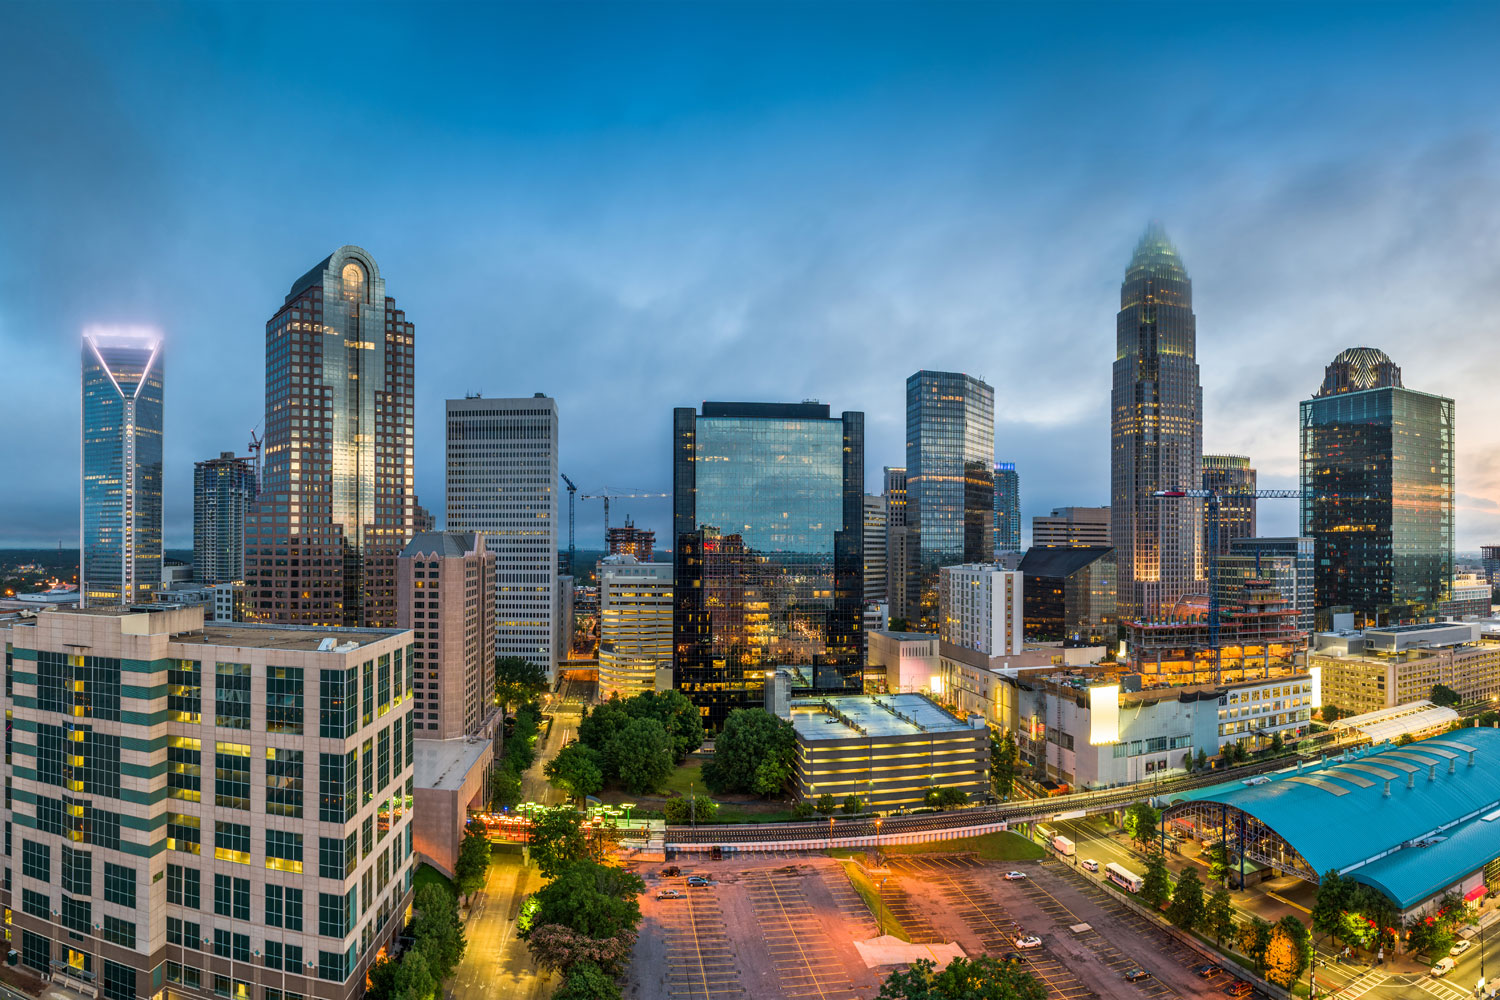 48 hours in Charlotte, North Carolina: How to spend two days in